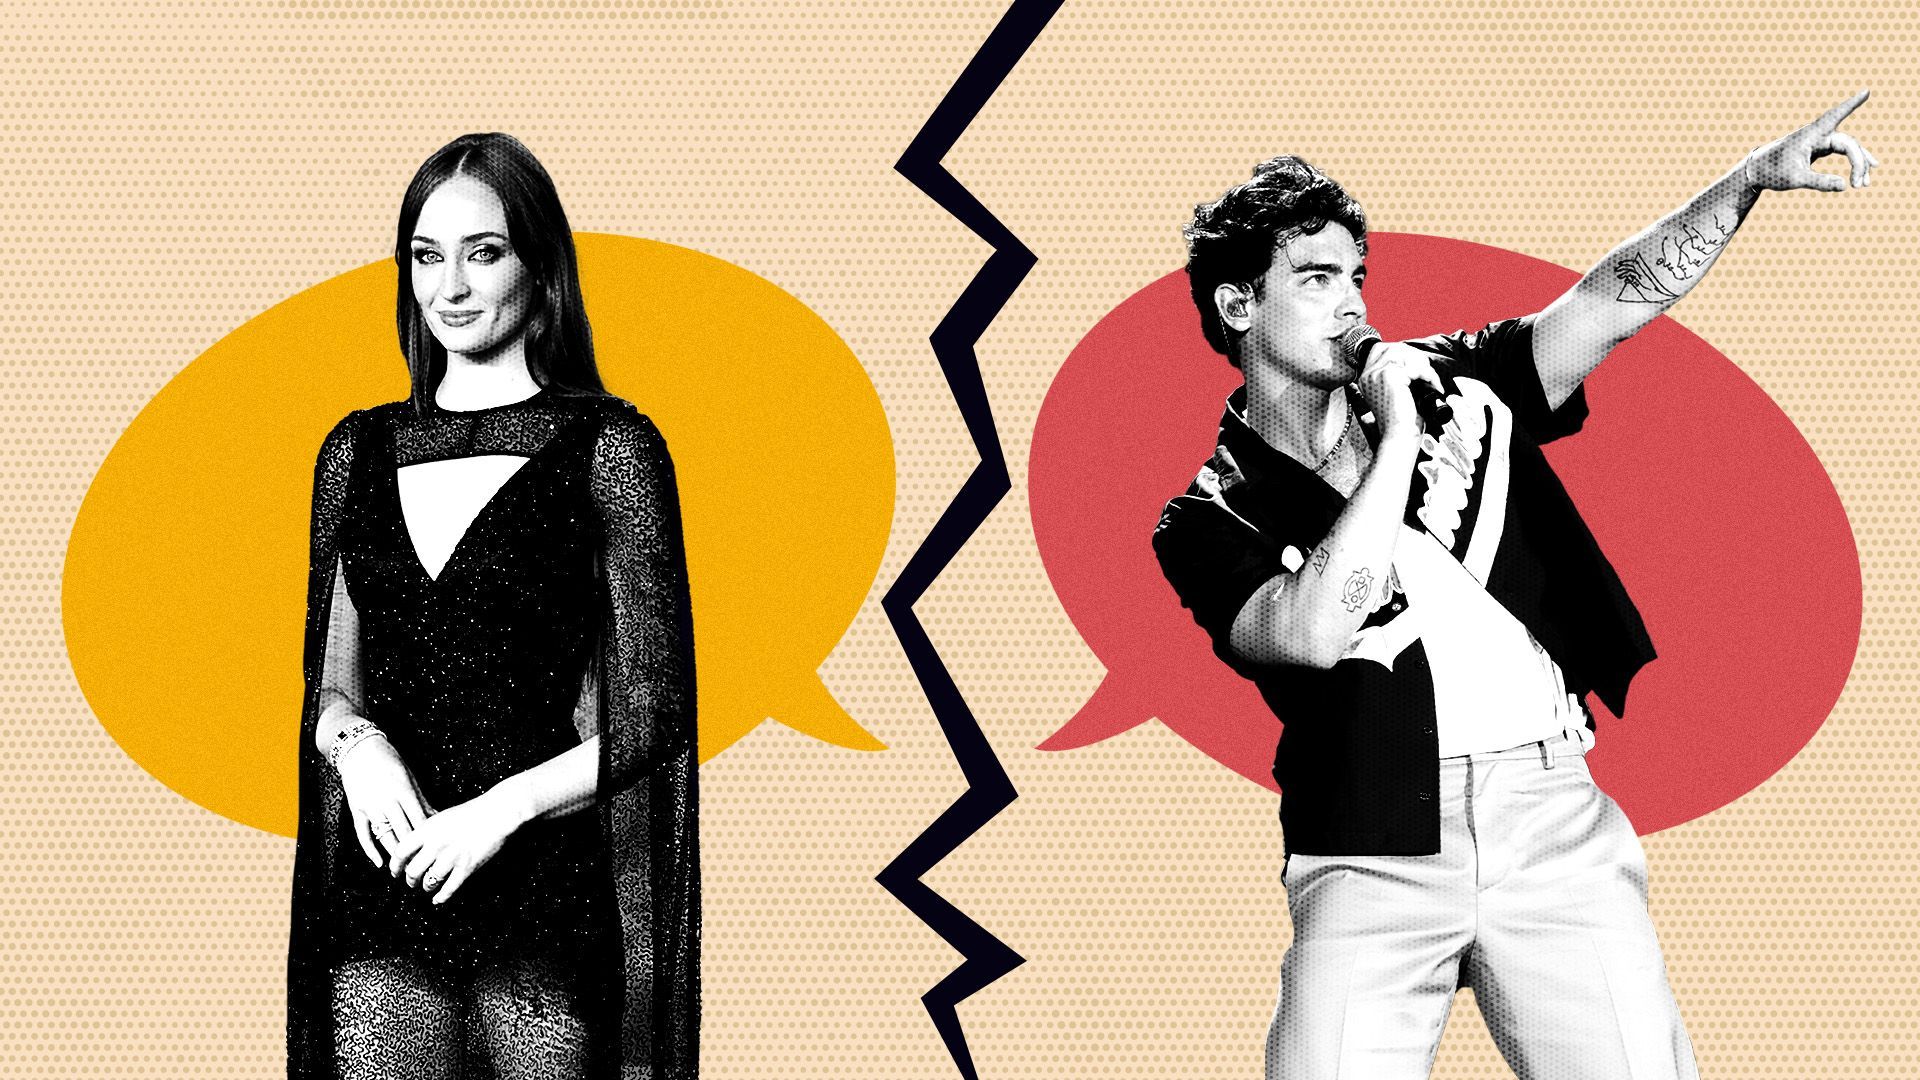 Photo illustration of Sophie Turner and Joe Jonas featuring a crack down the middle and speech bubbles behind them